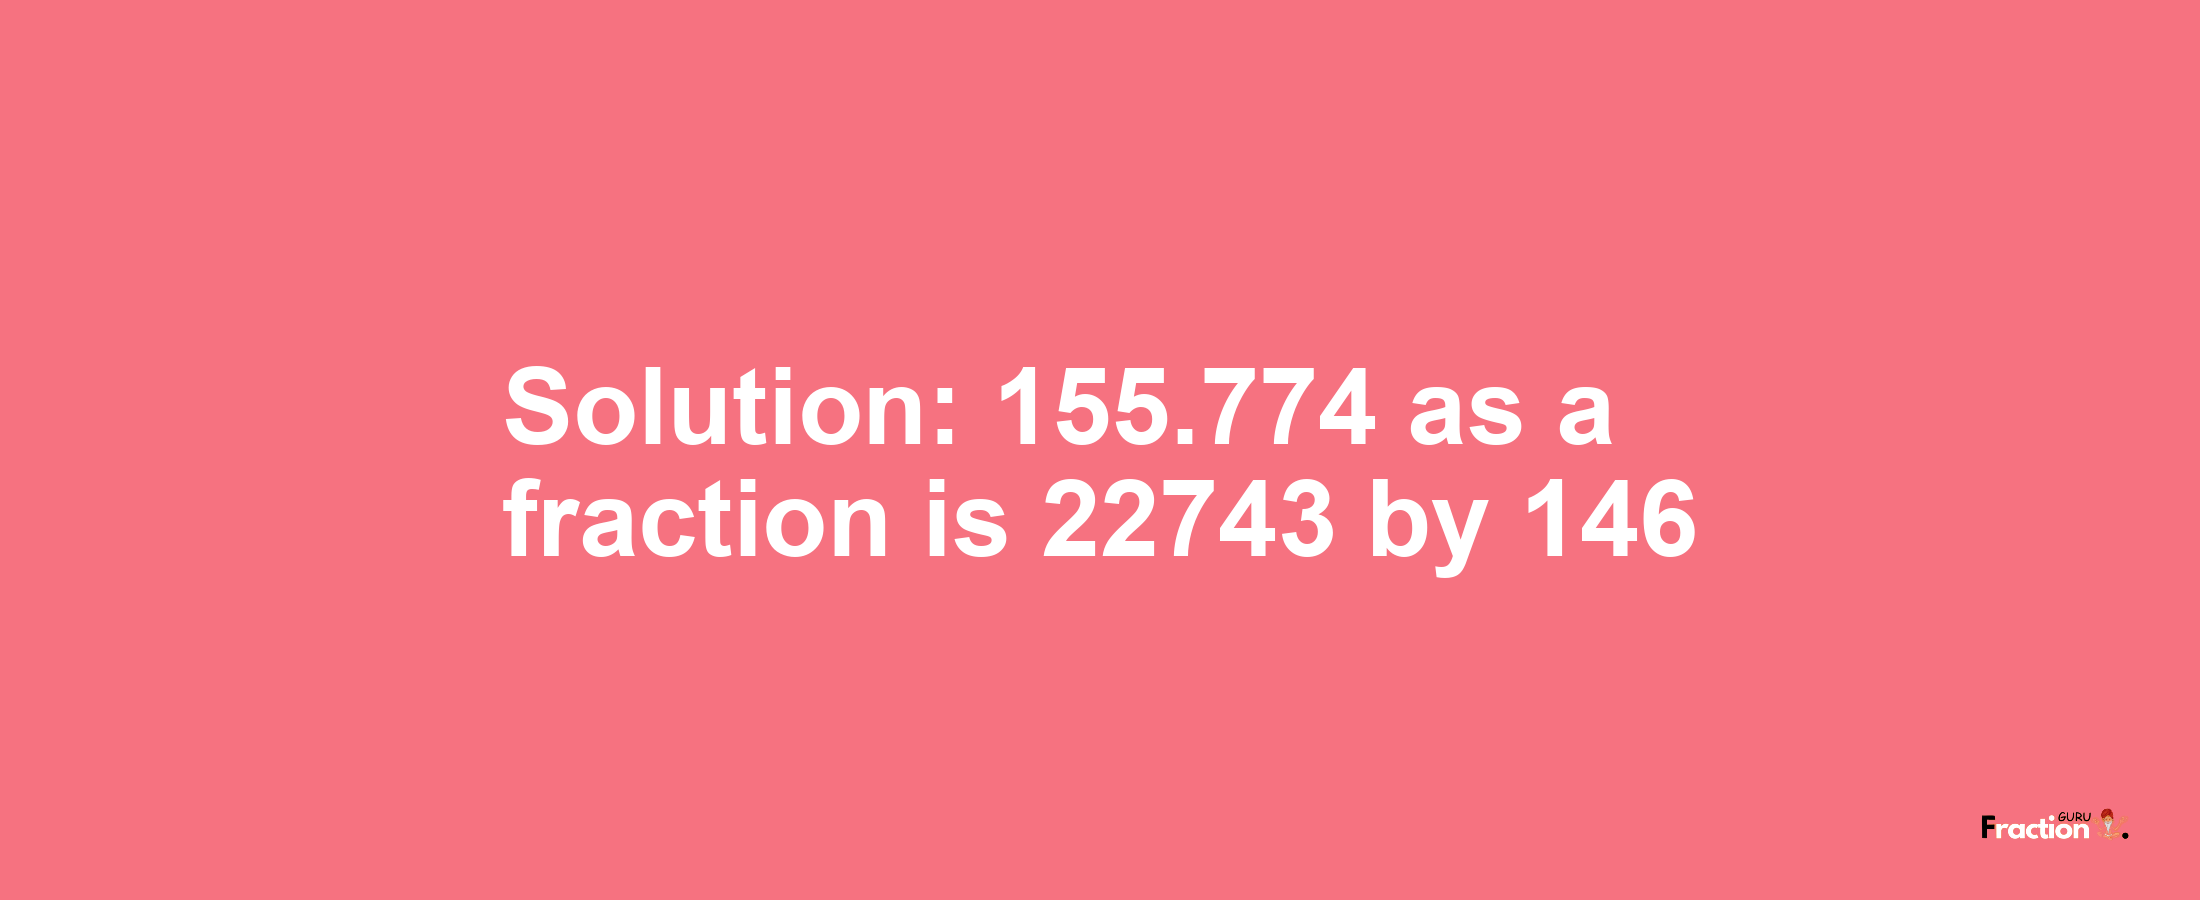 Solution:155.774 as a fraction is 22743/146